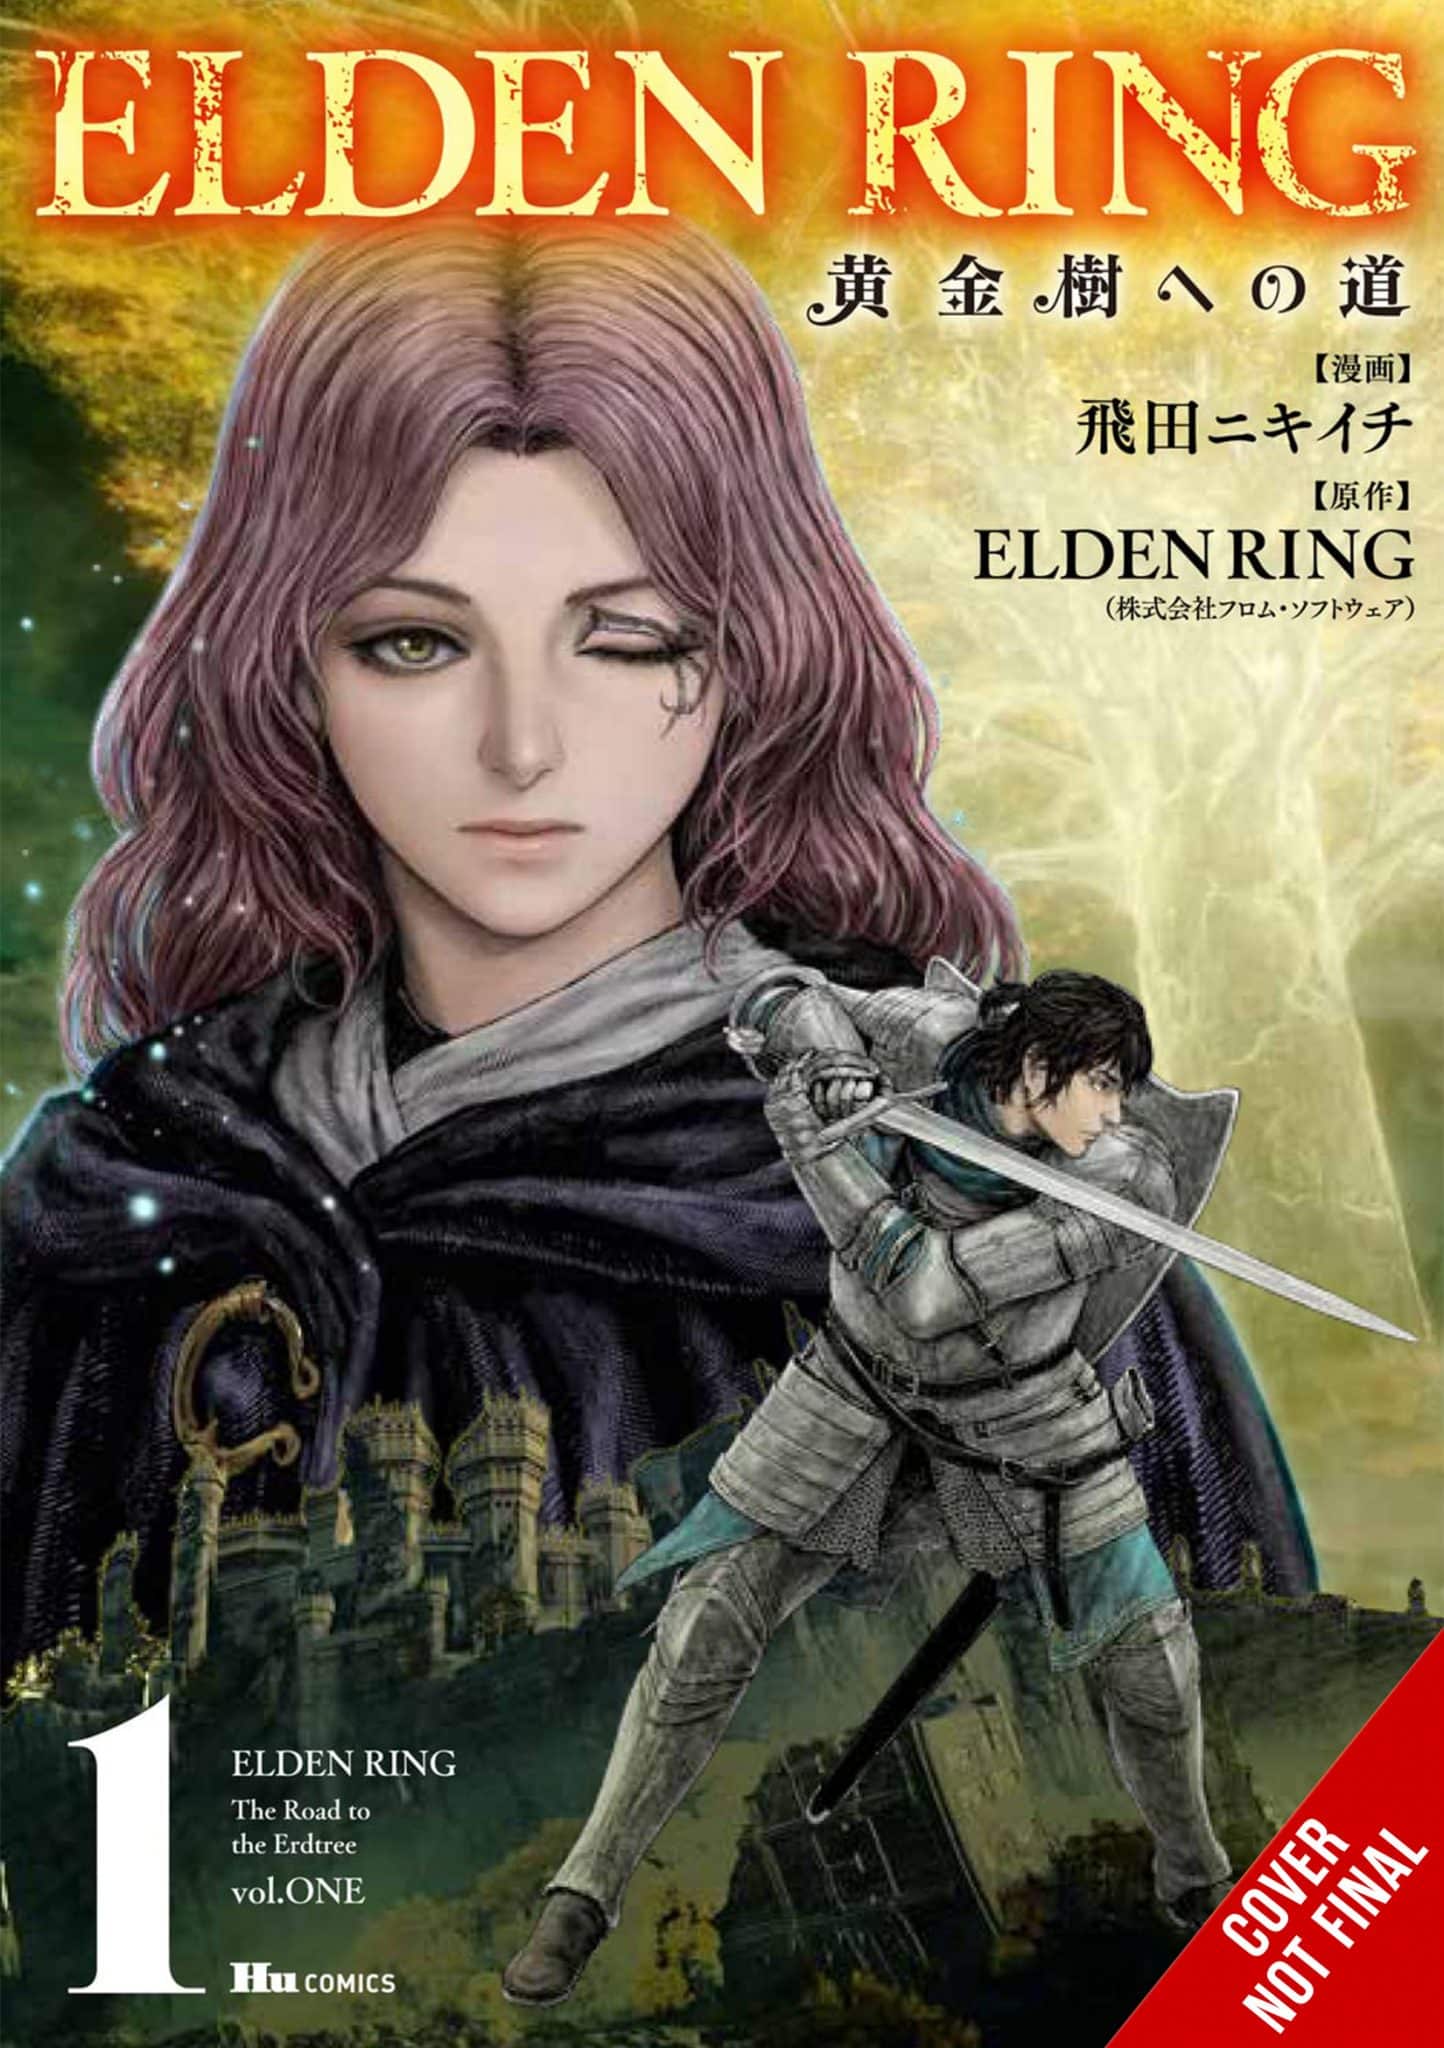 Elden Ring The Road to the Erdtree Manga Acquired by Yen Press